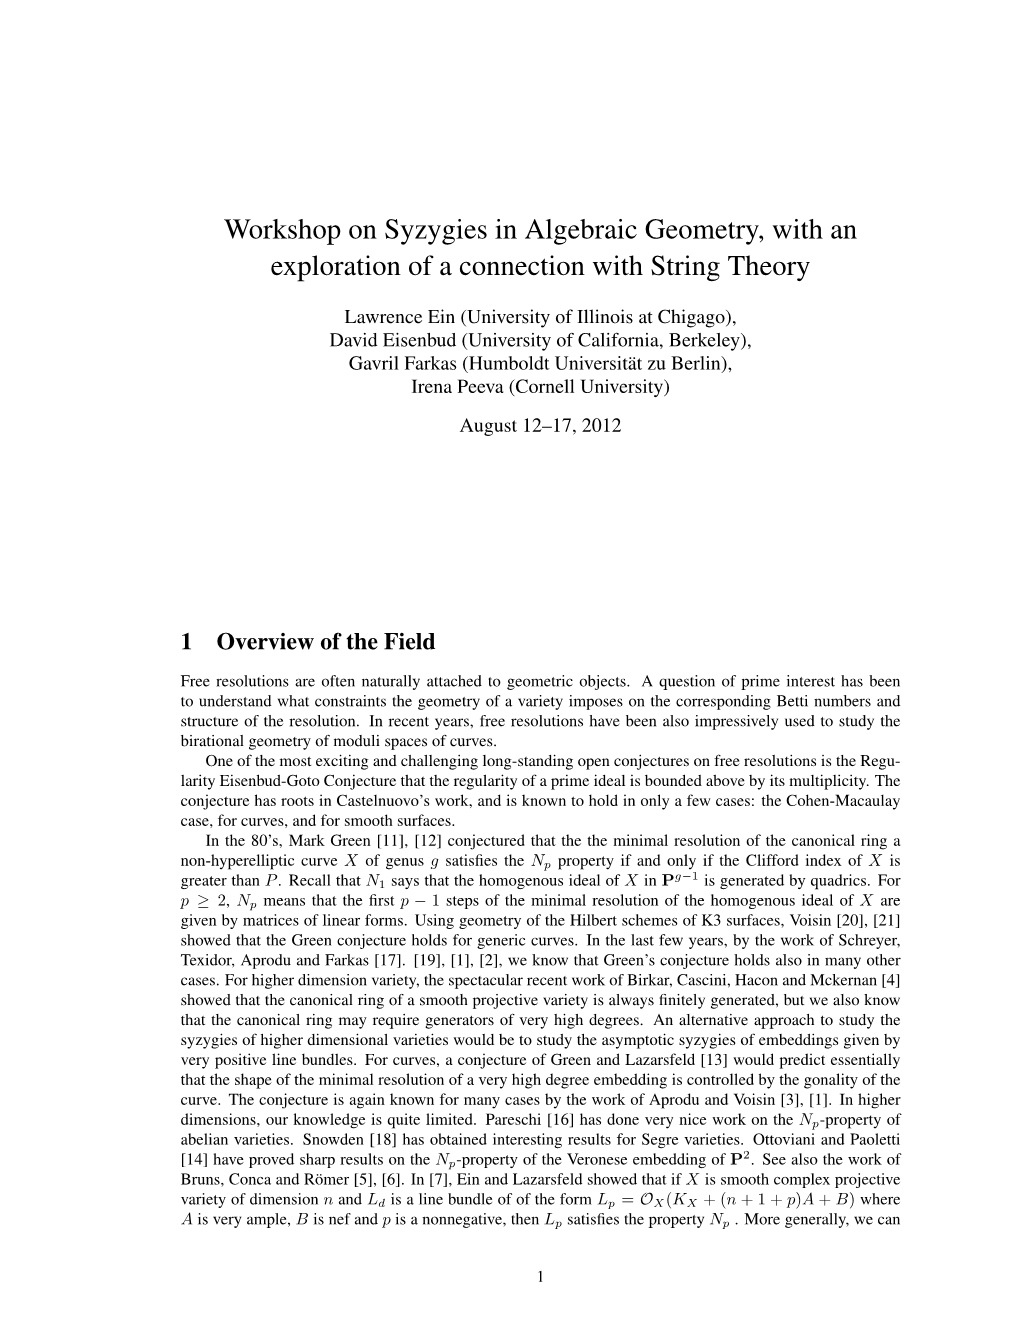 Workshop on Syzygies in Algebraic Geometry, with an Exploration of a Connection with String Theory